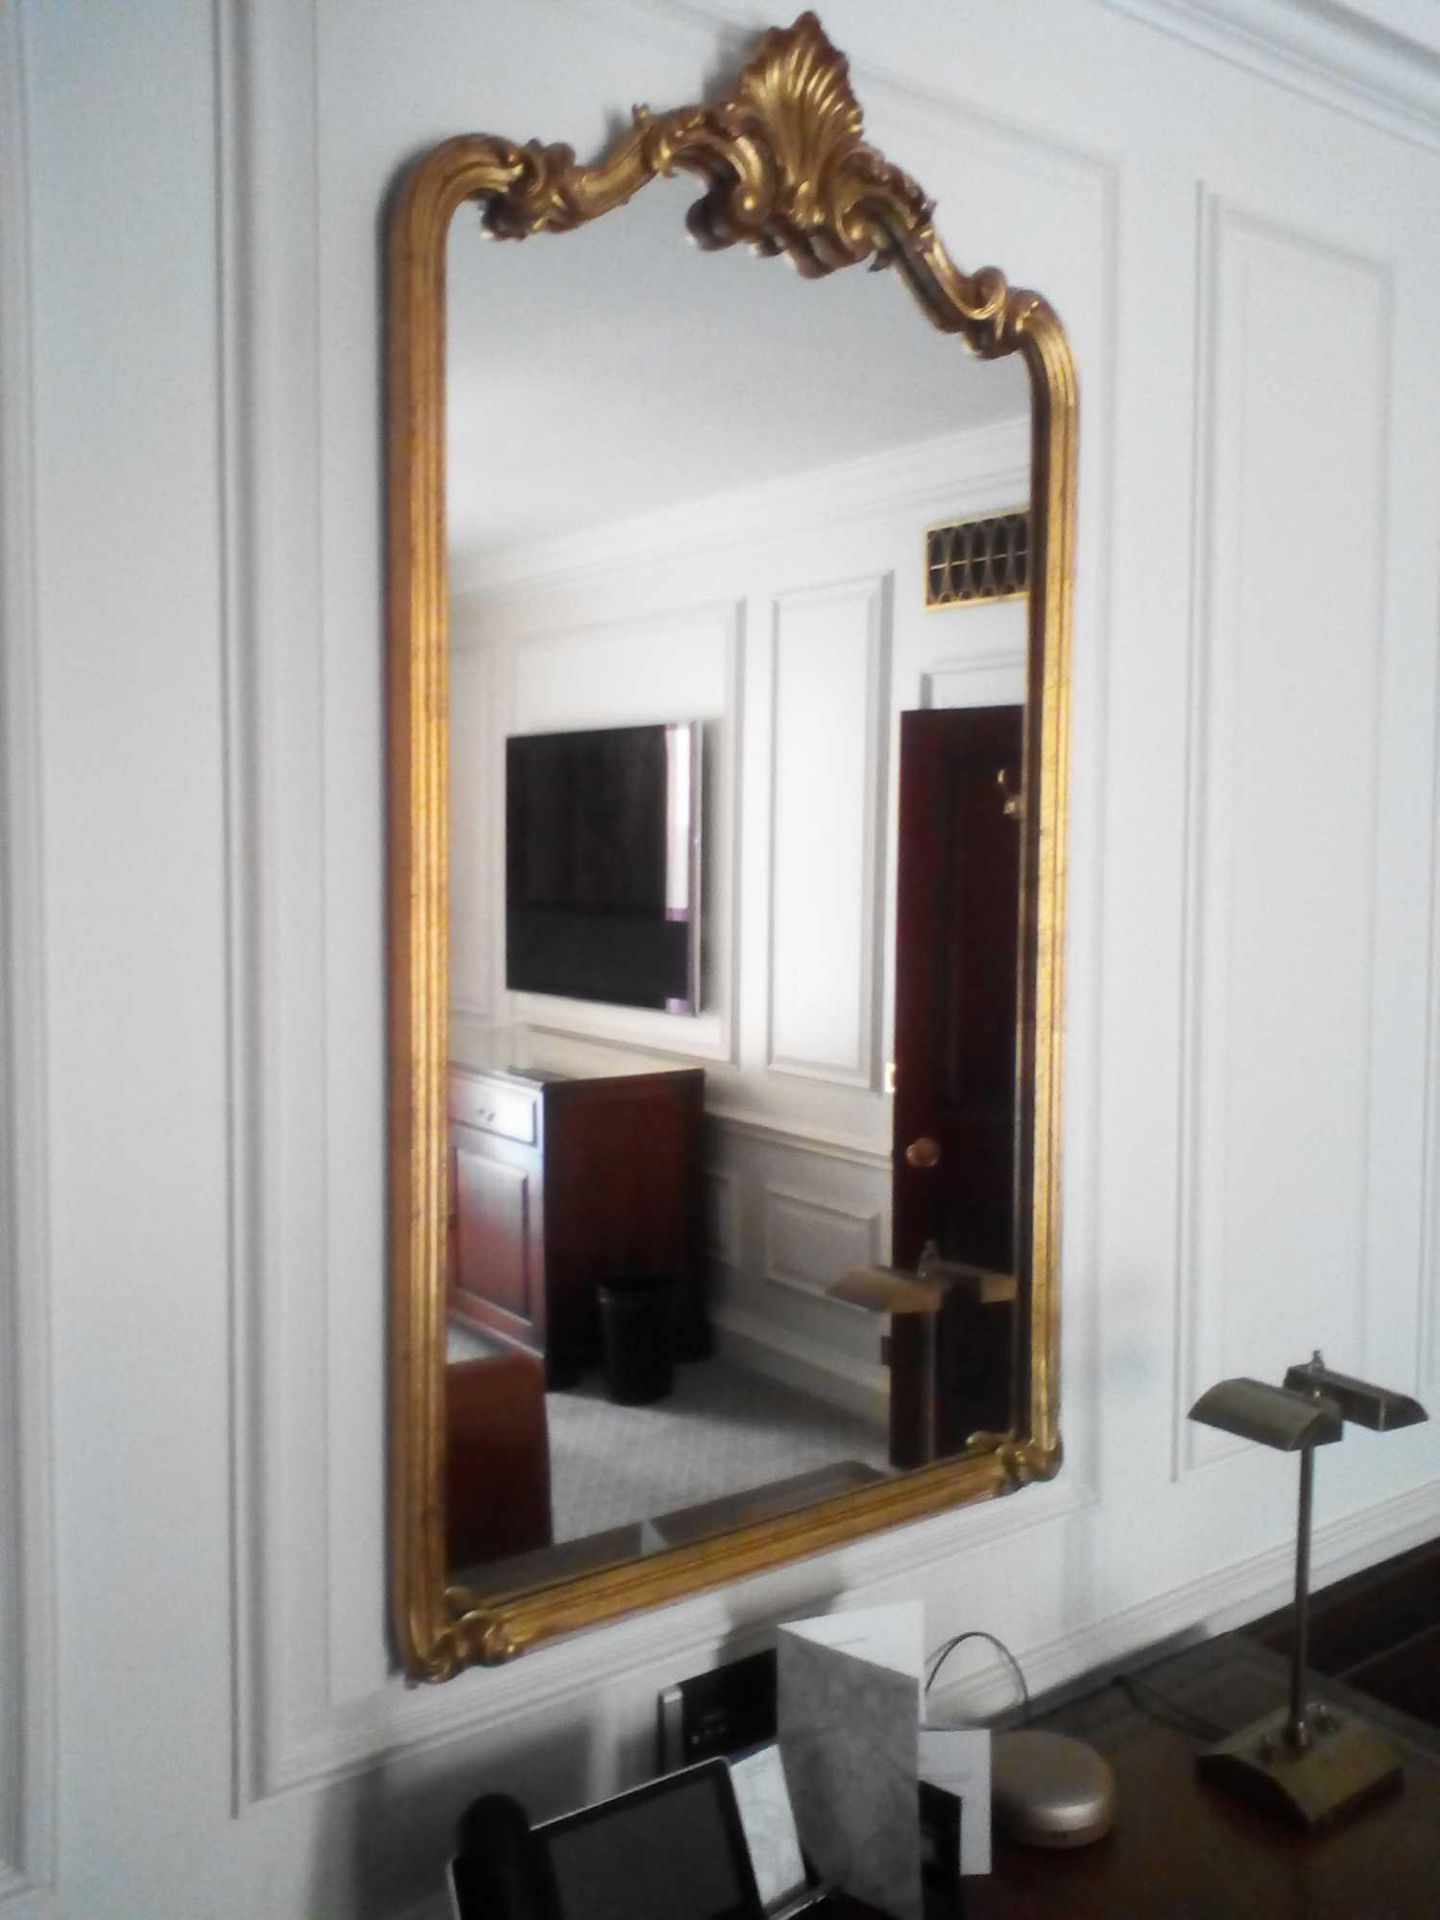 A Carved Gilt Rectangular Wall Mirror With Shell Crest Pediment 76 x 135cm (Room 103)